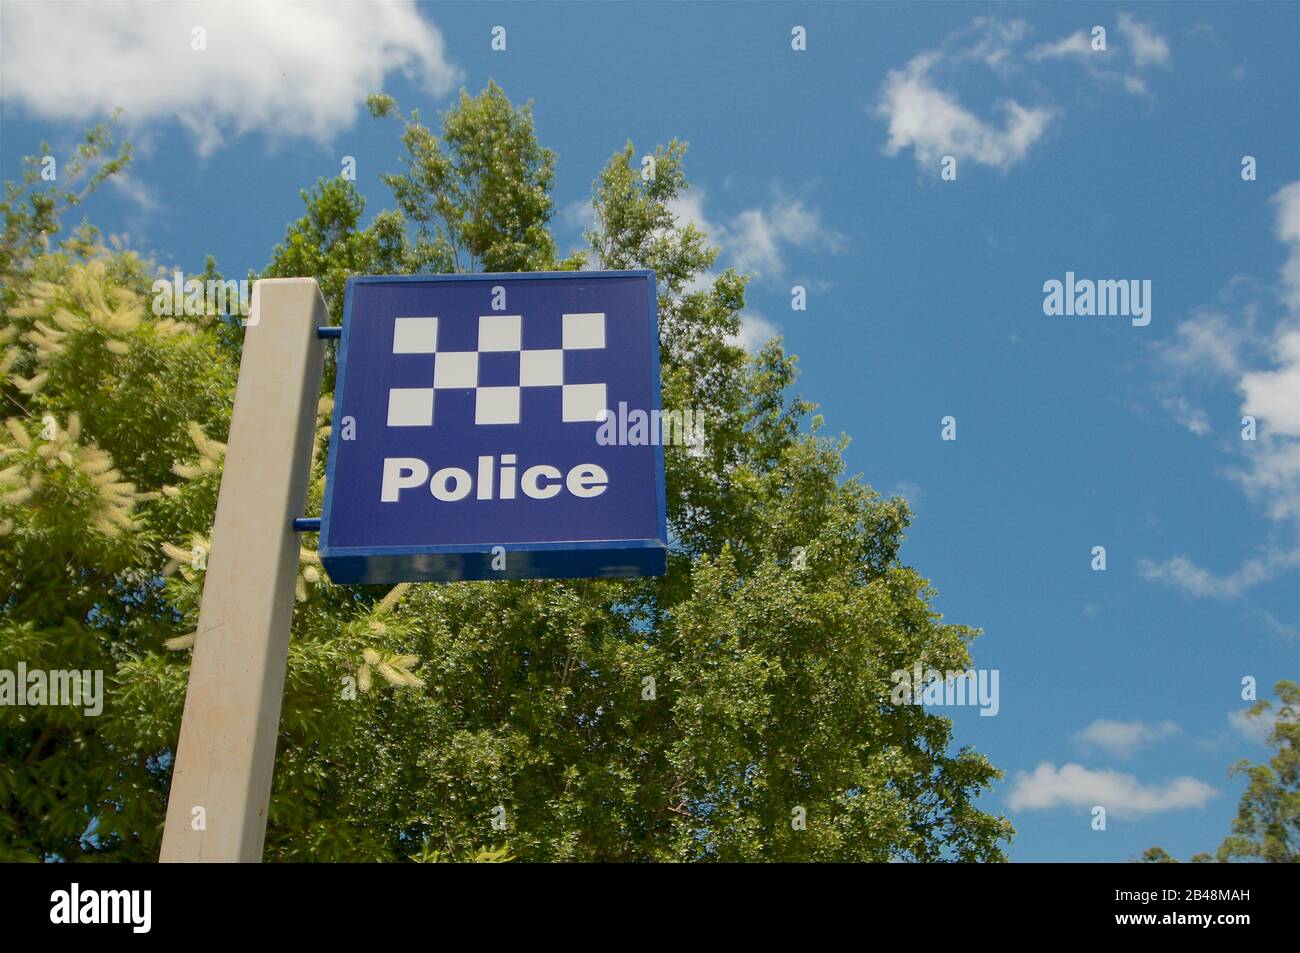 Eumundi, Queensland, Australia - 1st February 2020: View of the australian Police sign against a blue sky located outside a police station in Eumundi, Stock Photo